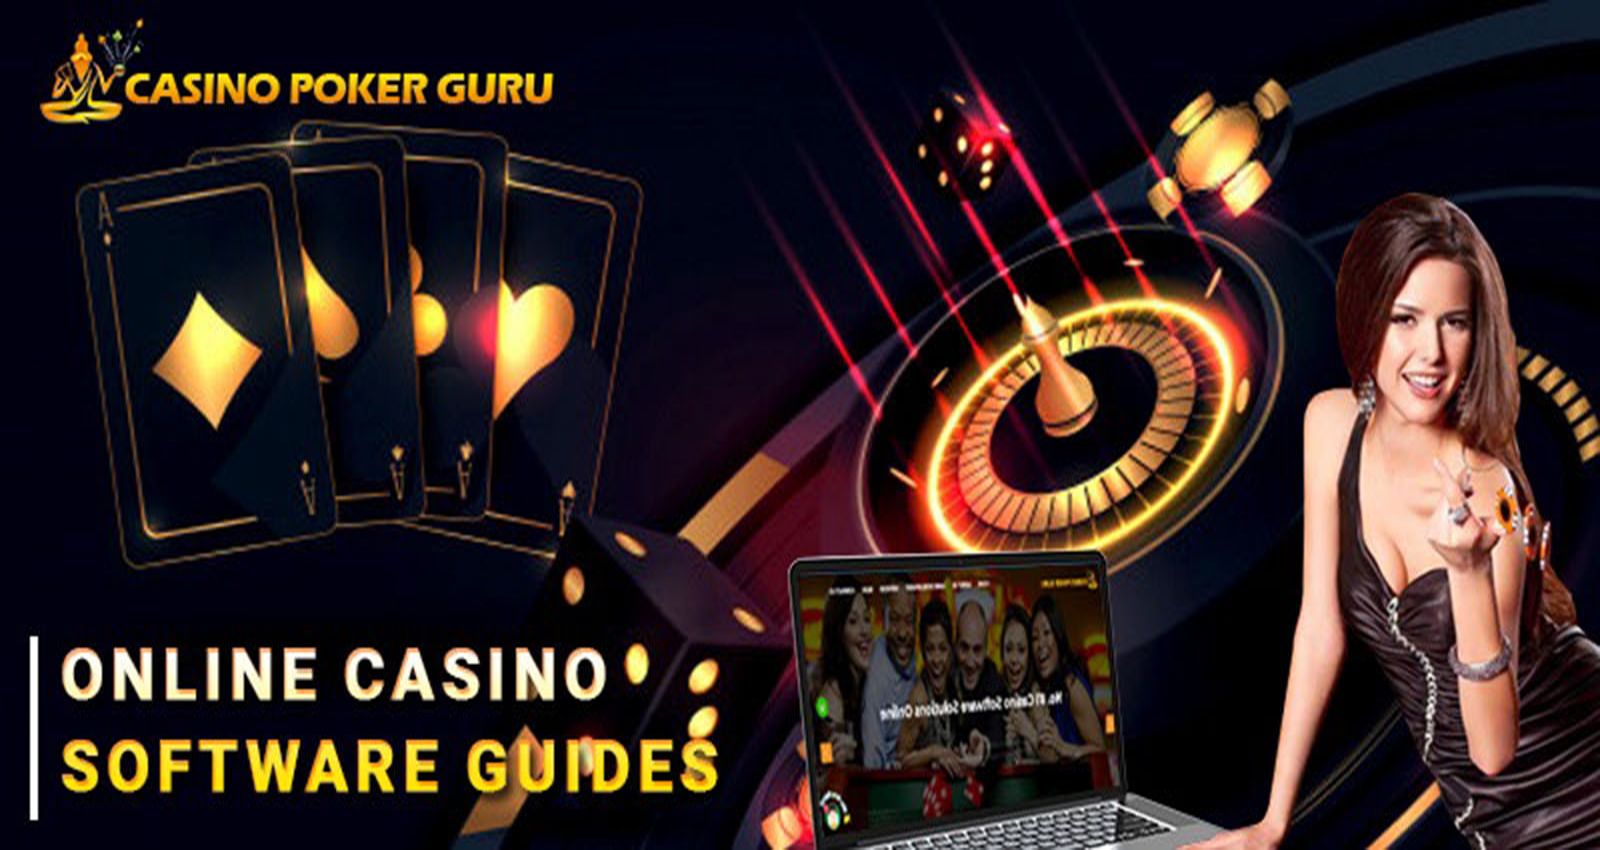 Online Casino Software Guides